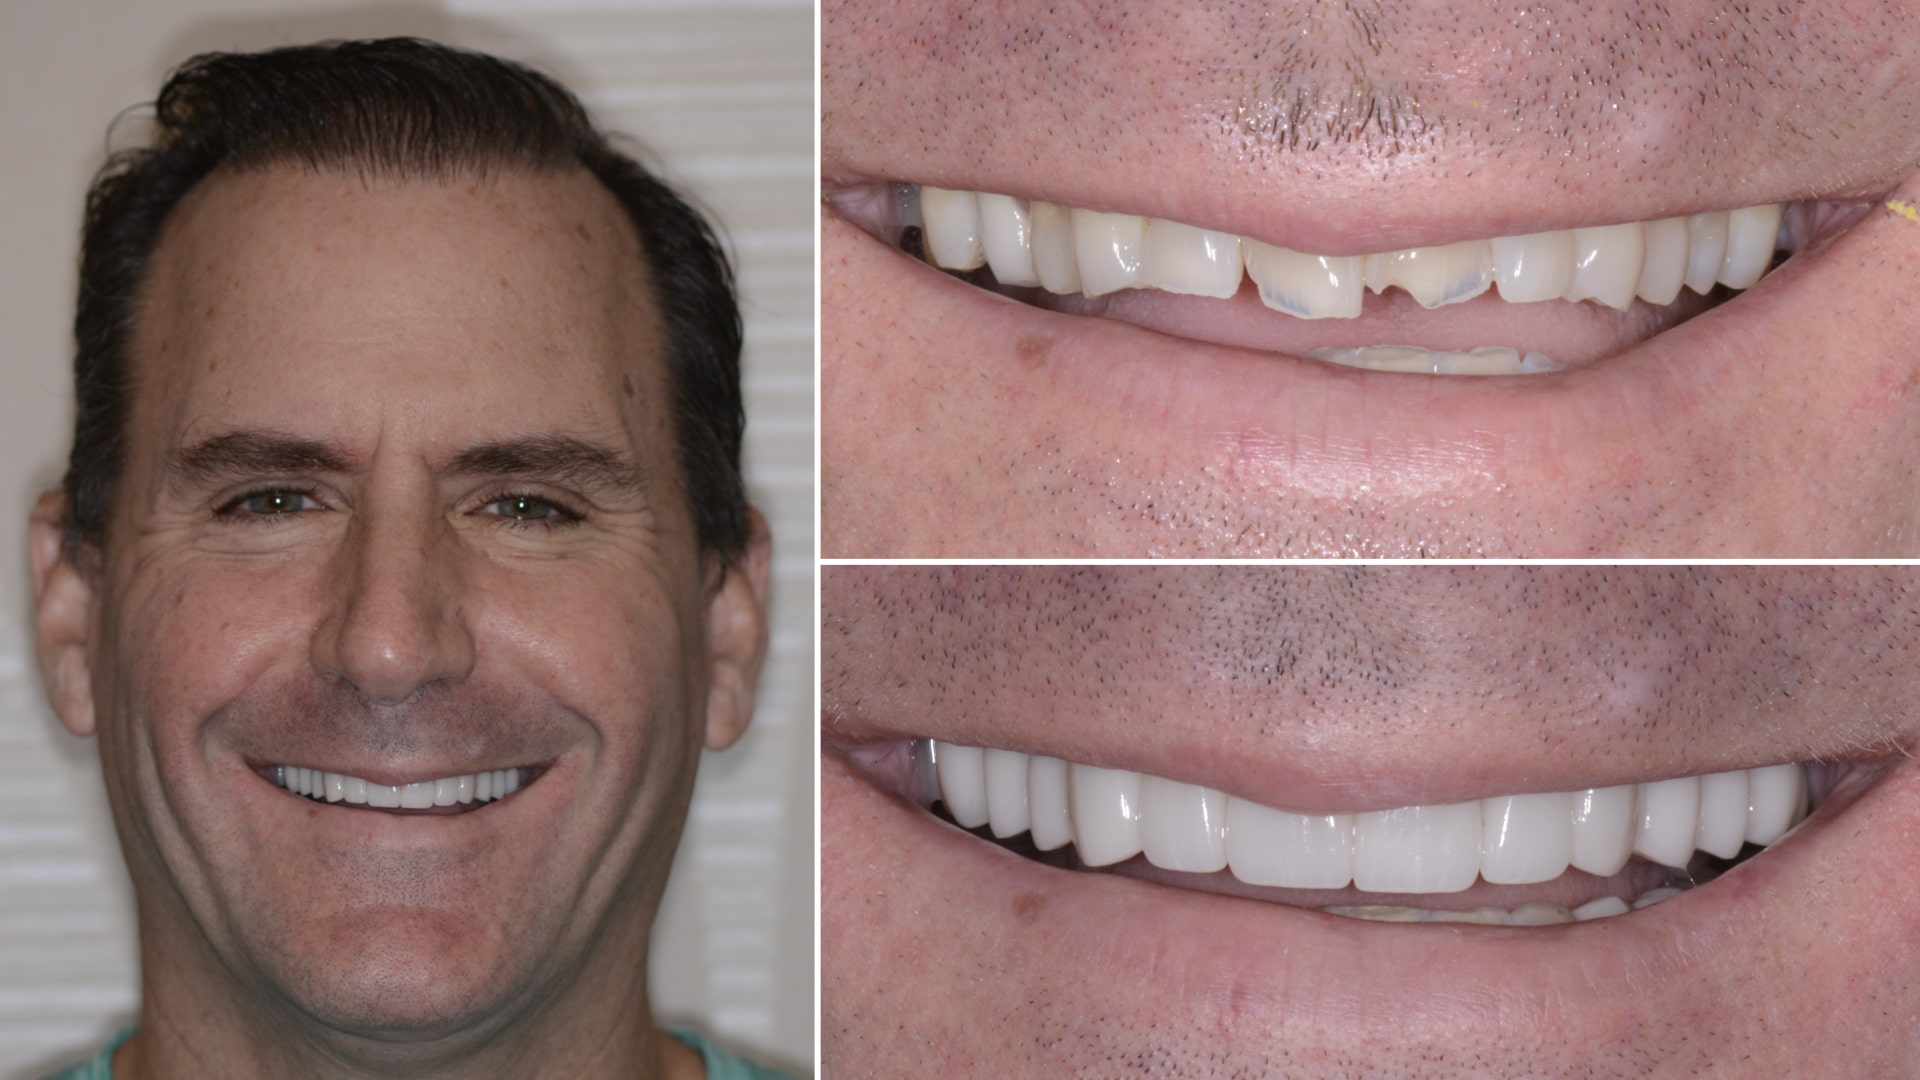 Man's smile before and after repairing damaged top front teeth